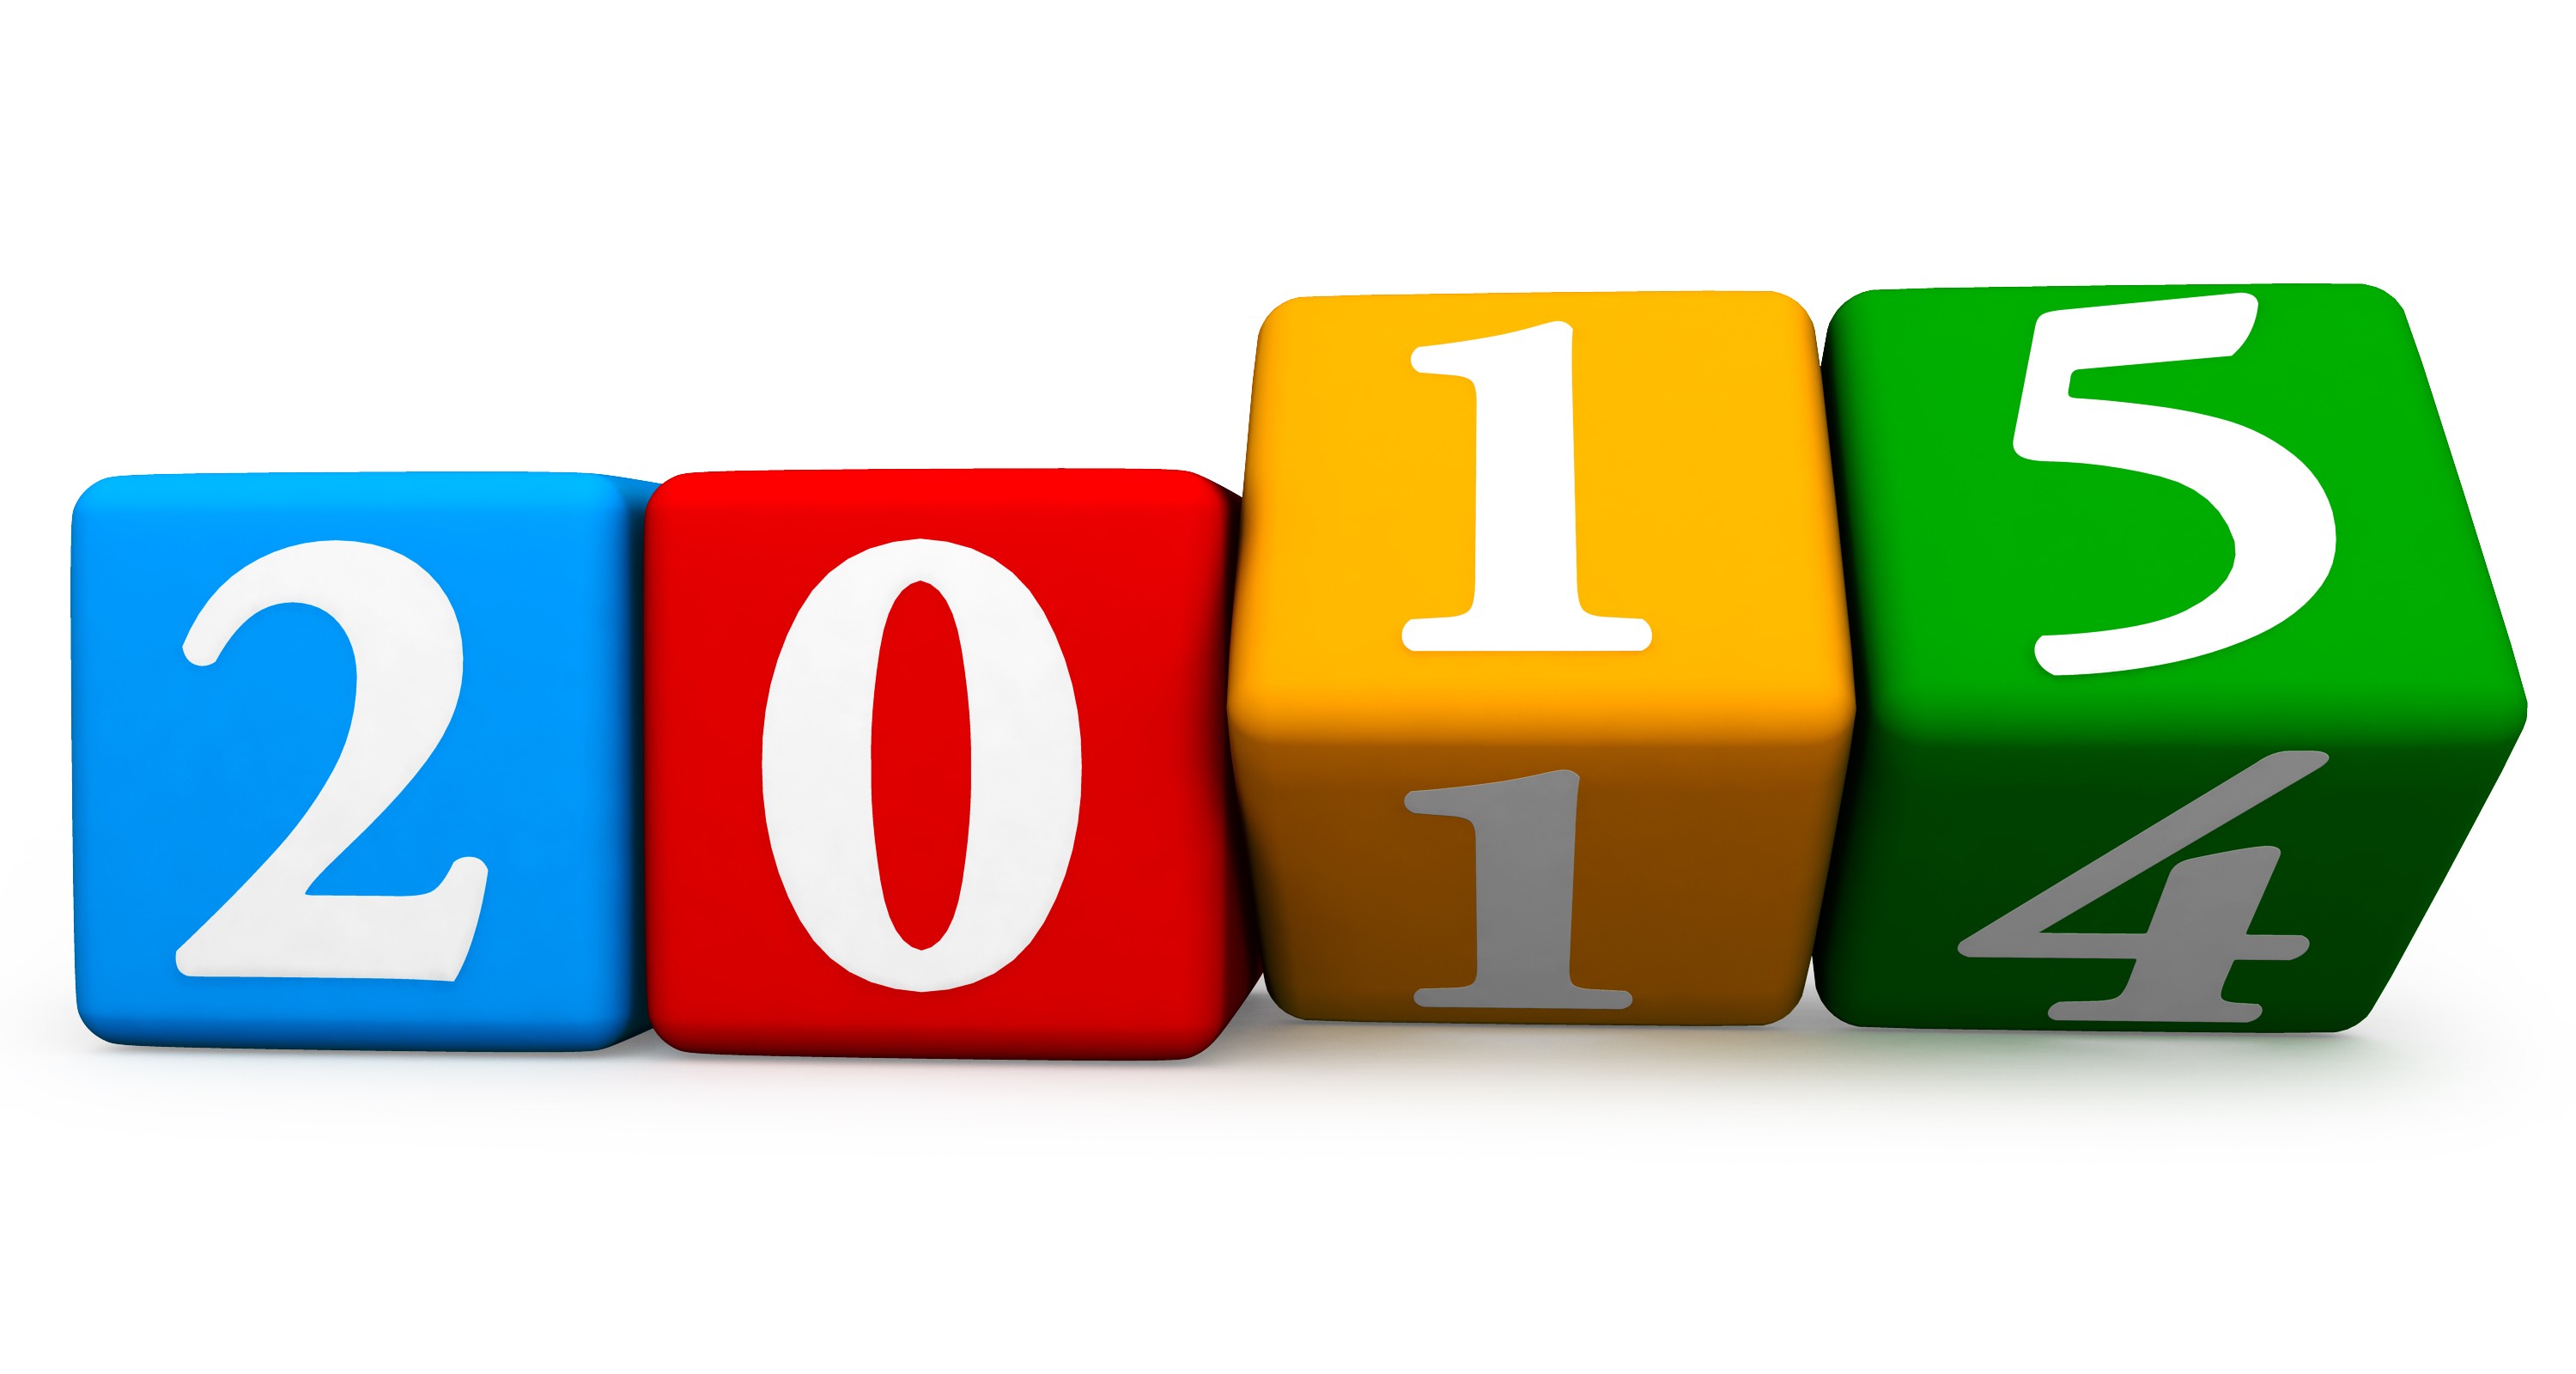 Different Colored Four Blocks With 2015 Year For Business Goals Stock